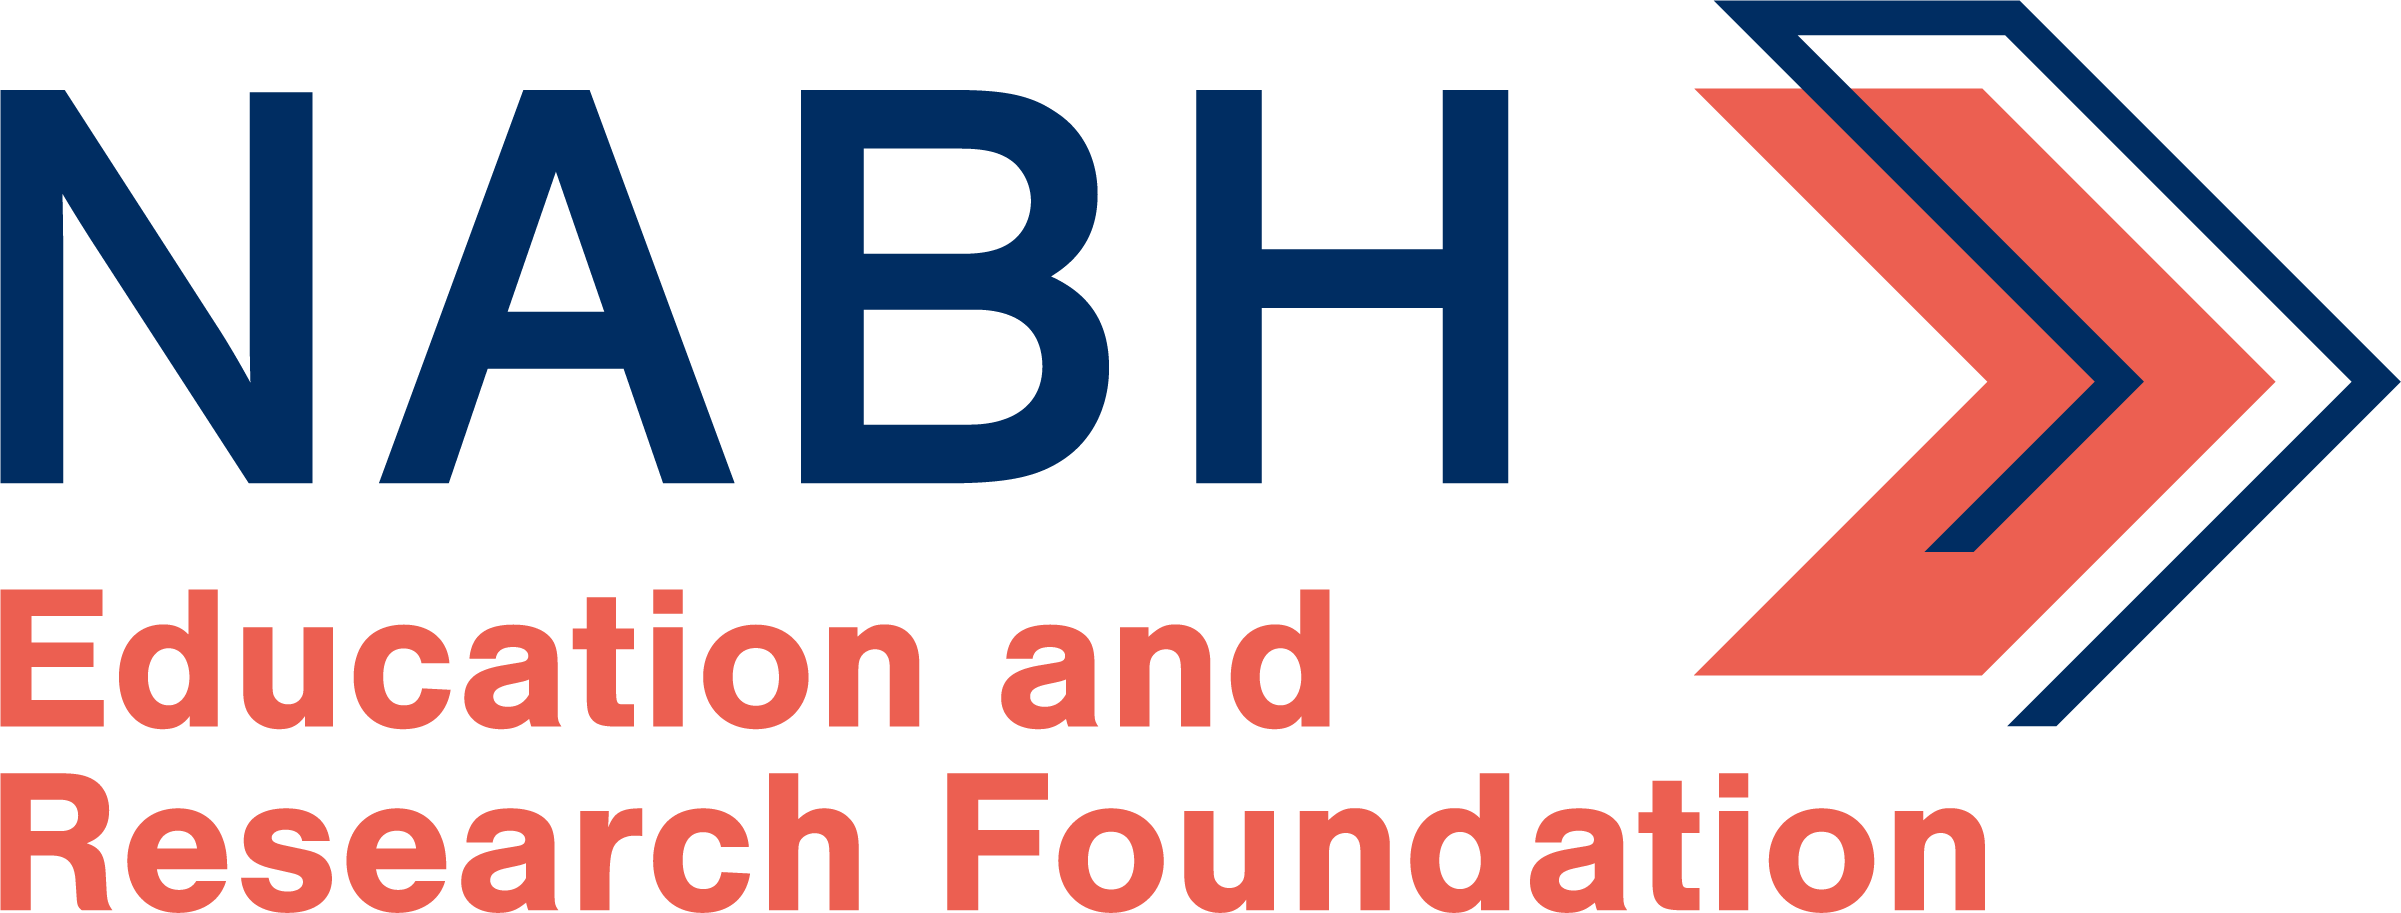 National Association for Behavioral Healthcare Education and Research Foundation logo